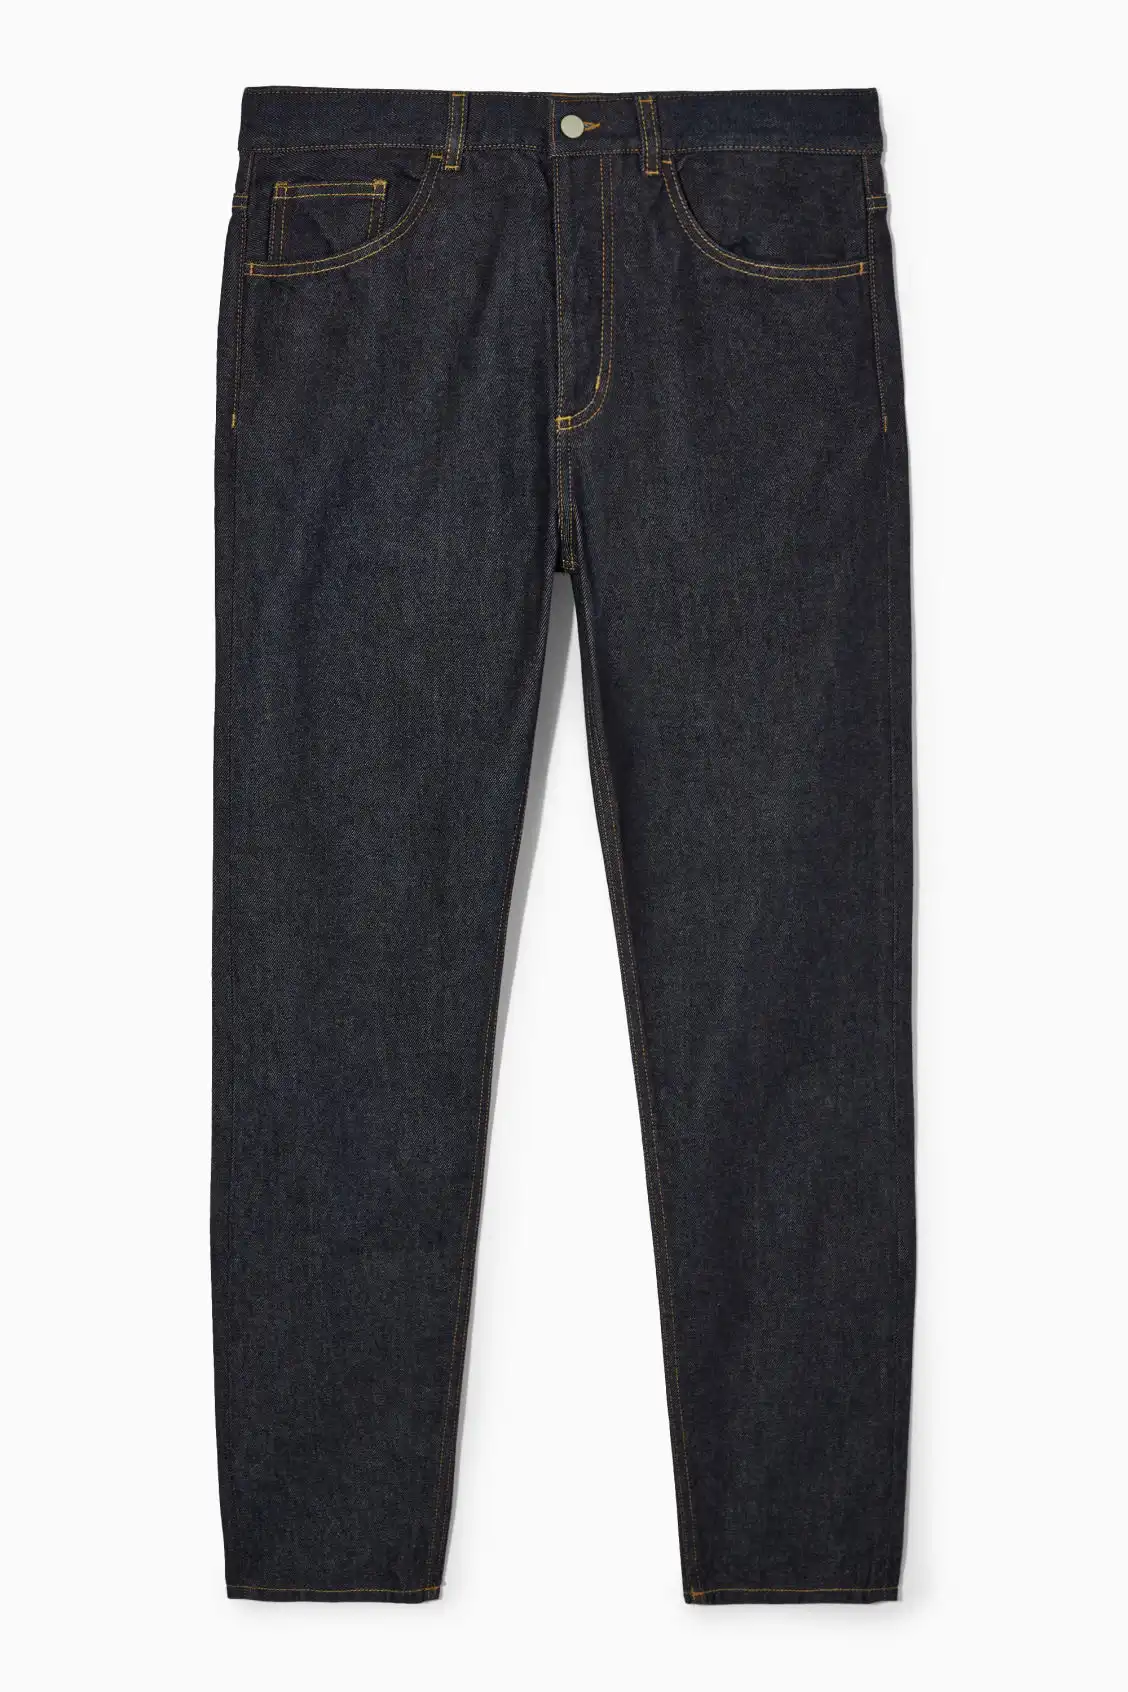 COS Regular Fit Tapered Jeans